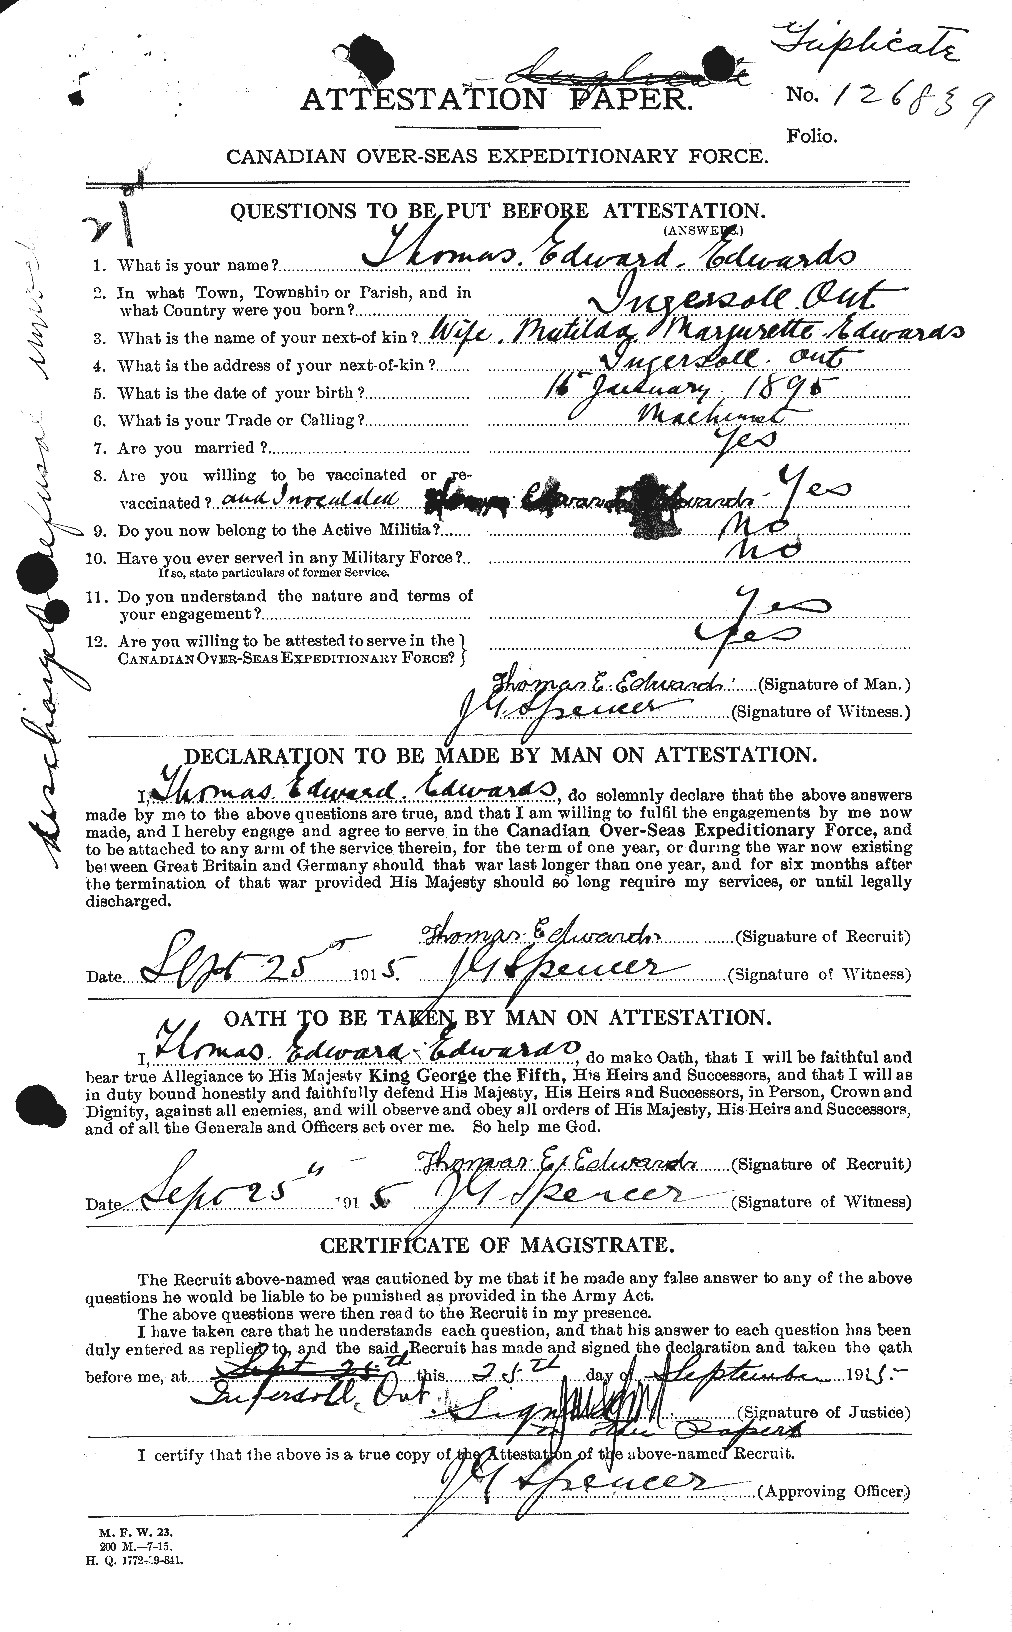 Personnel Records of the First World War - CEF 310342a